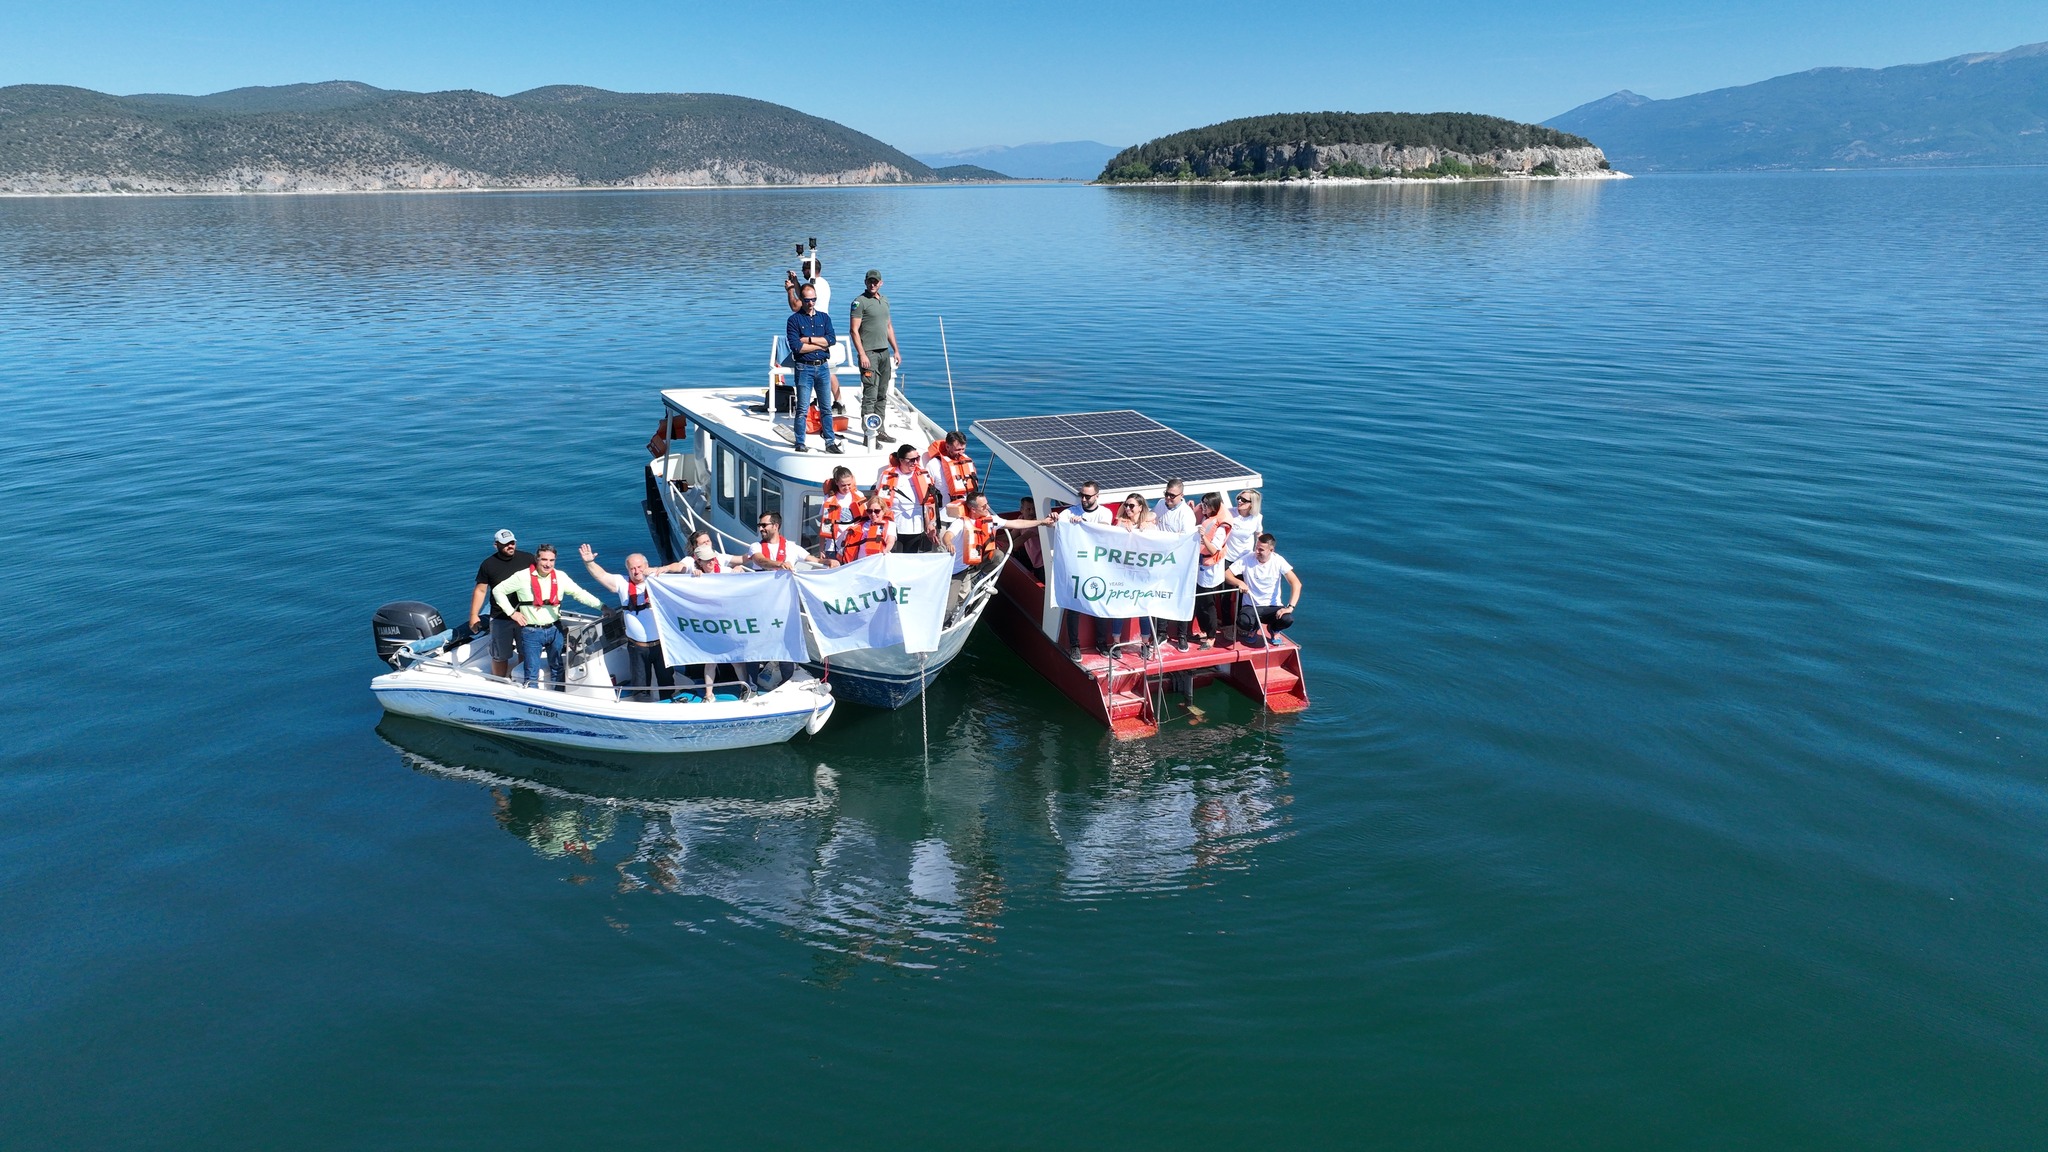 PrespaNet Celebrates a Decade of Transboundary Collaboration & Conservation Efforts in Prespa￼